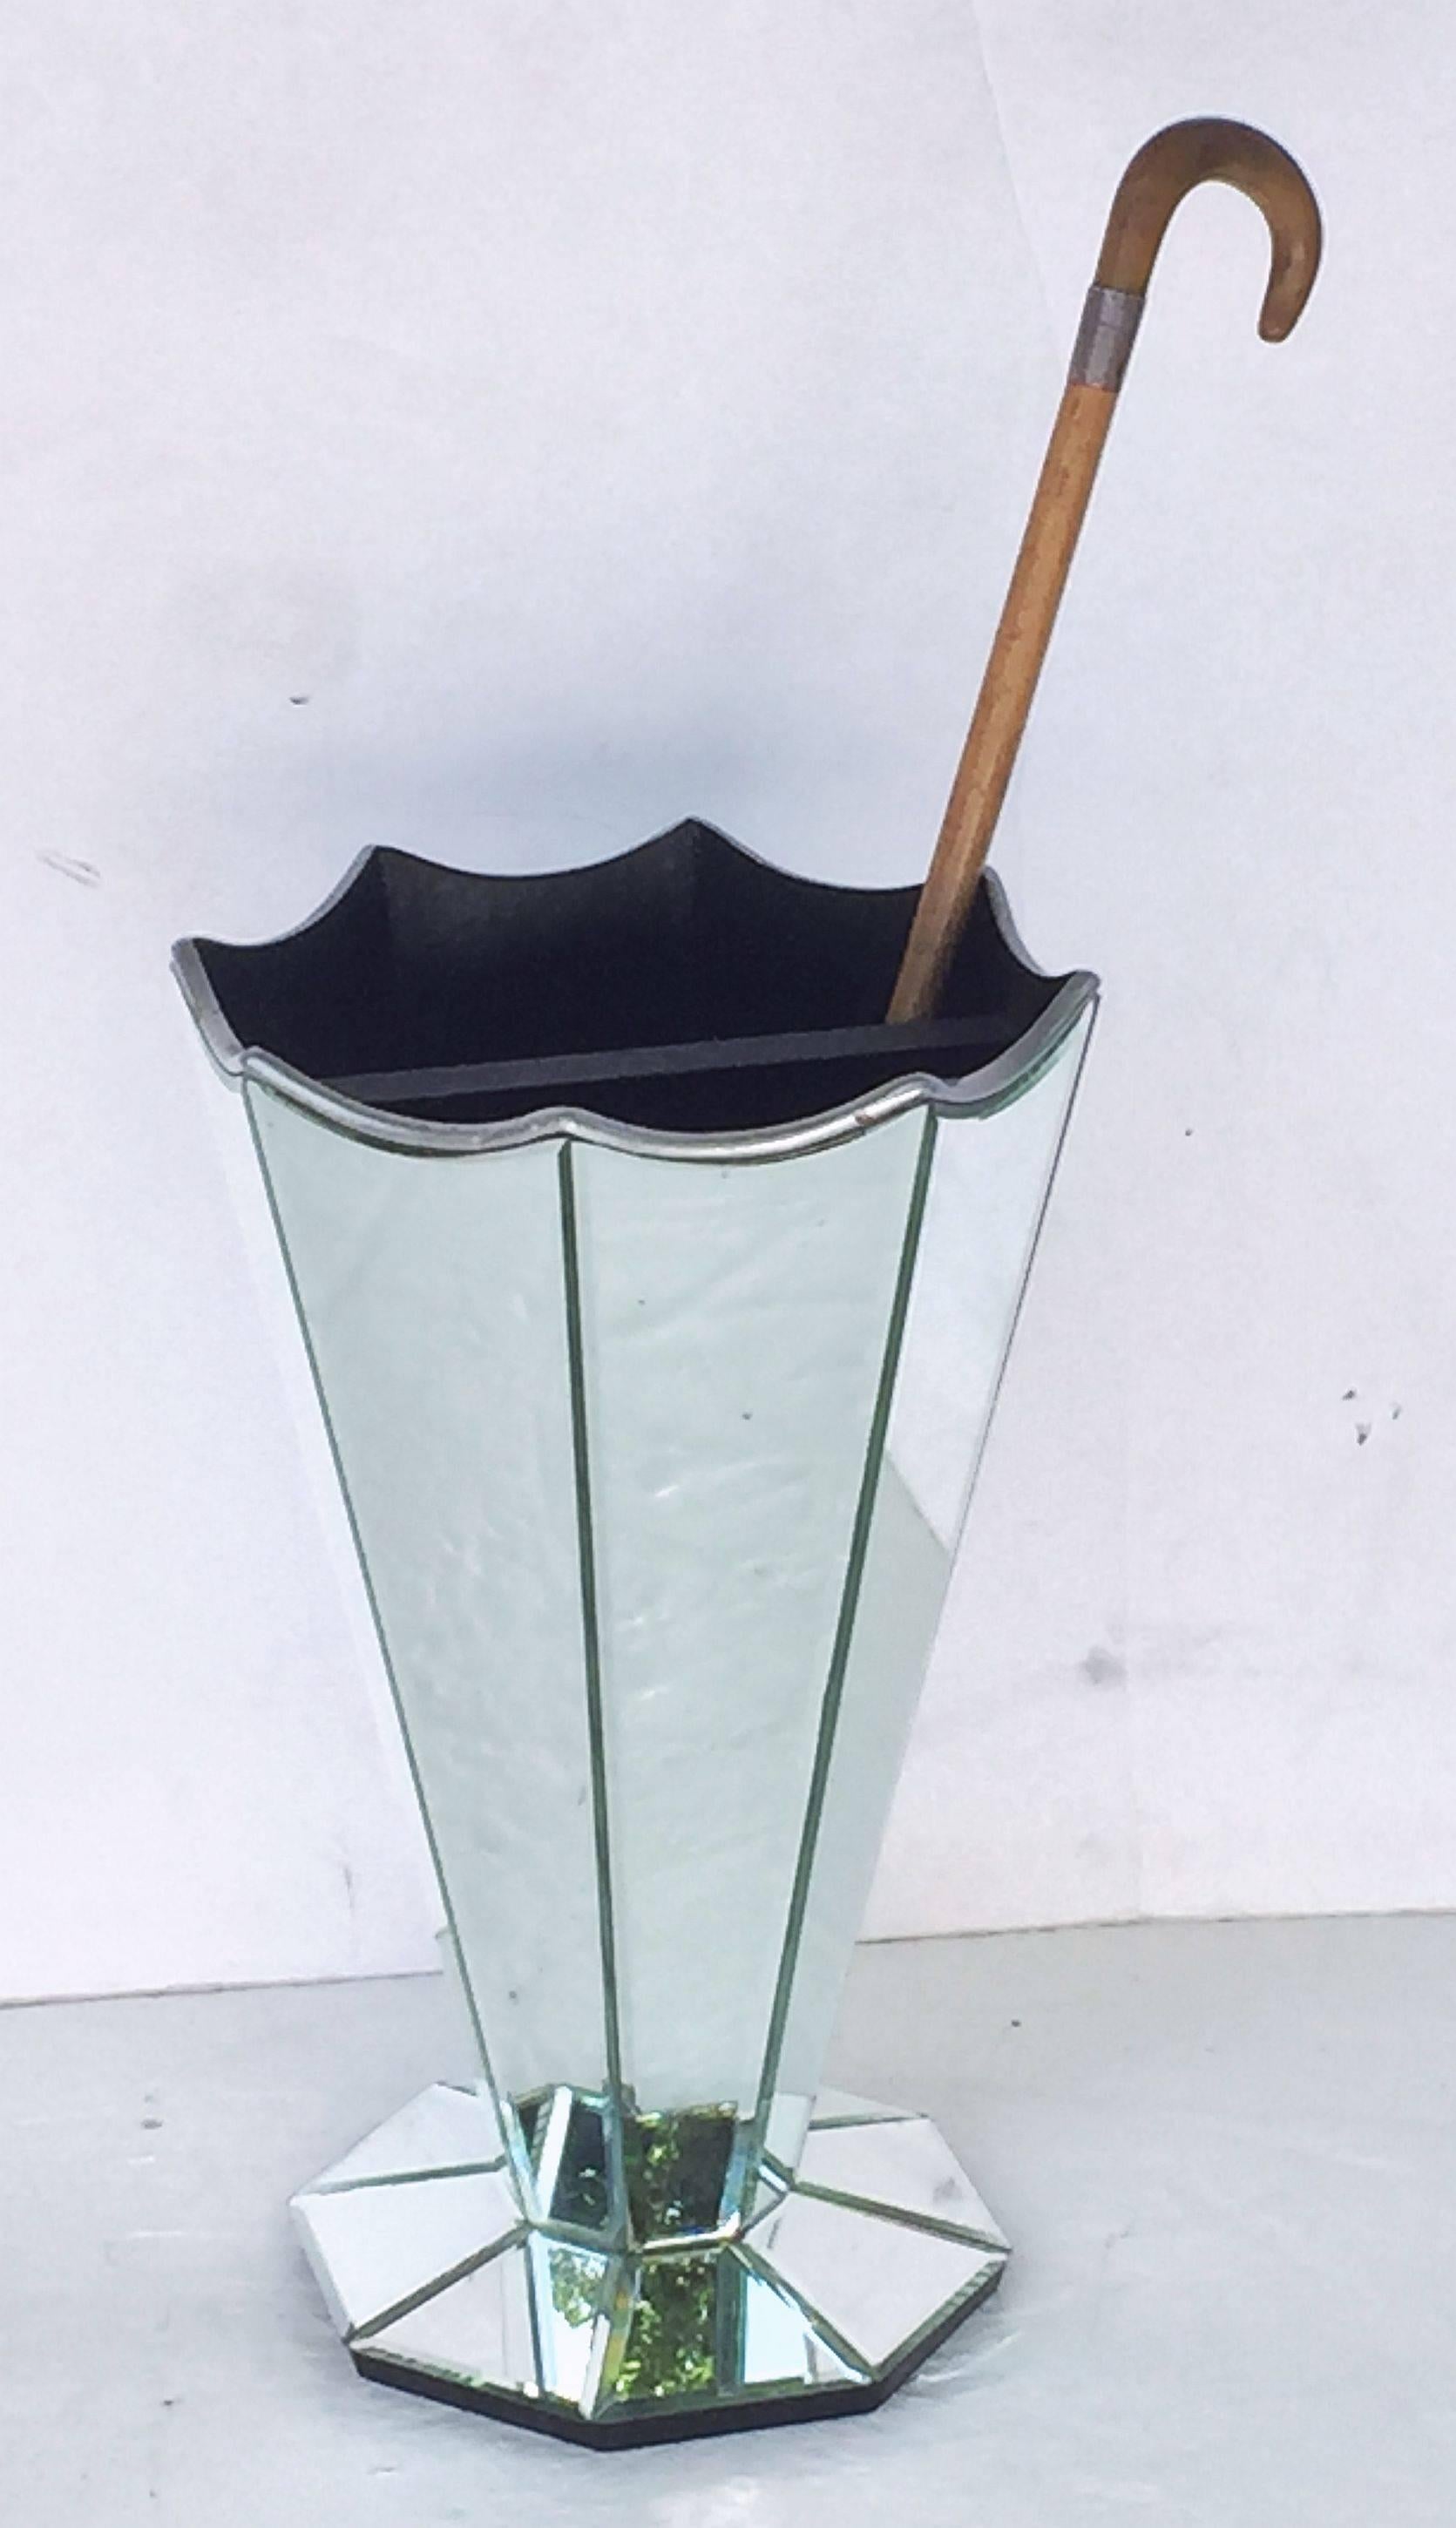 A fine English umbrella or stick stand, featuring an Art Deco or modernist design, with eight faceted sides of mirrored glass mounted to a wooden base, with silver and black accents.